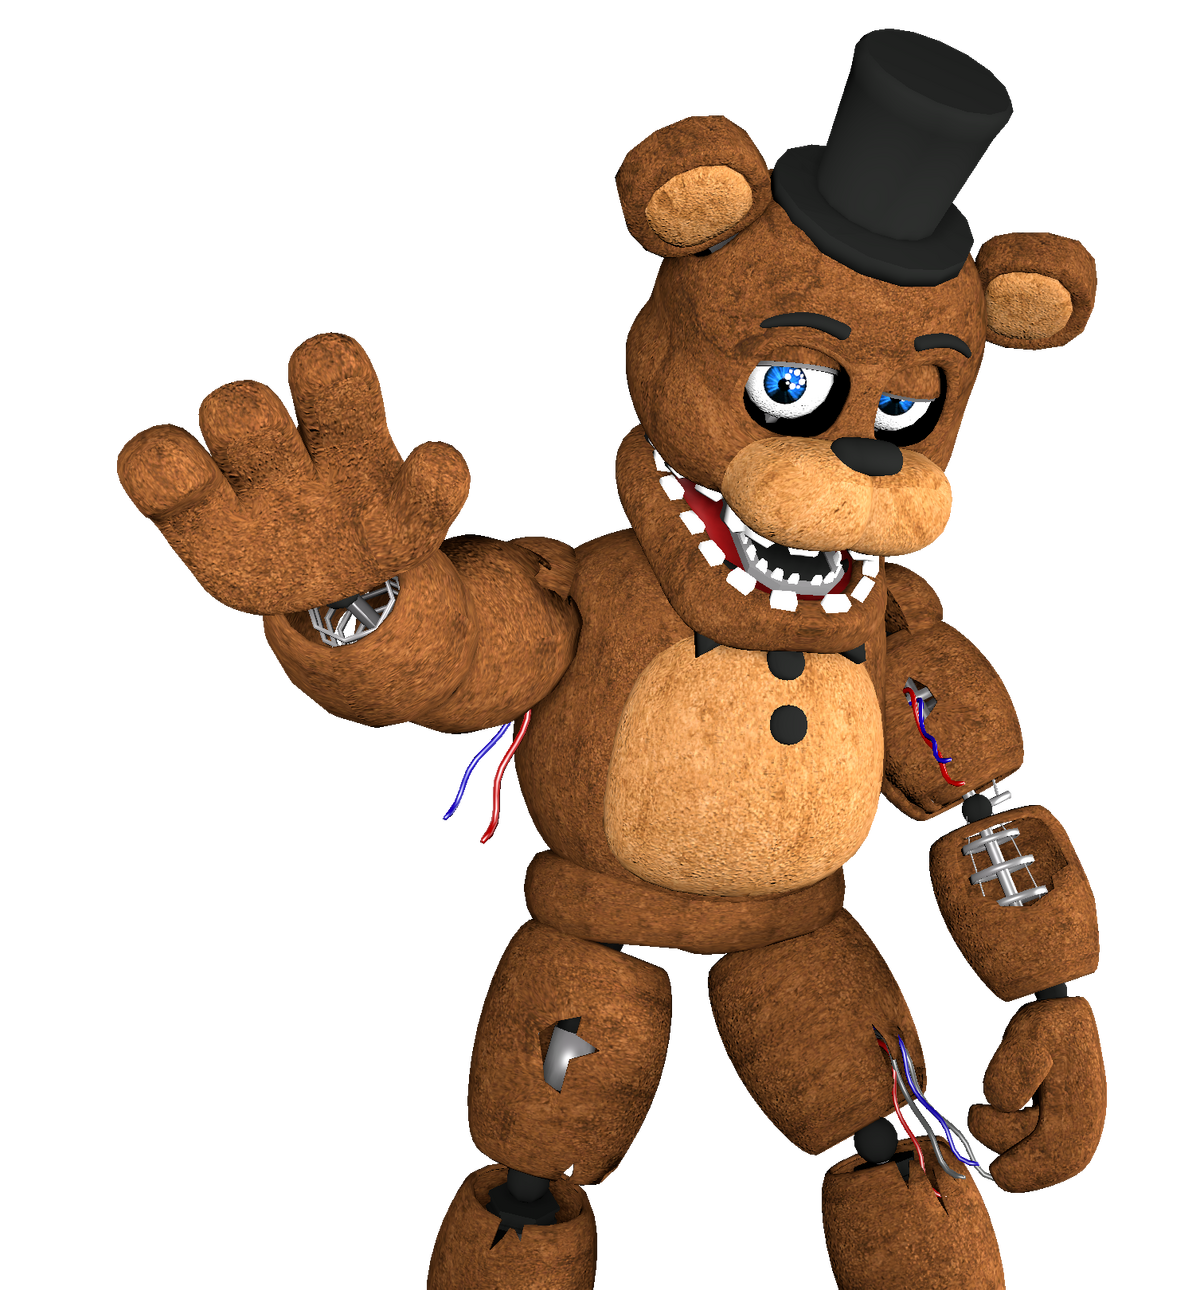 Five Nights with 39 II, Five Nights With 39 Wiki